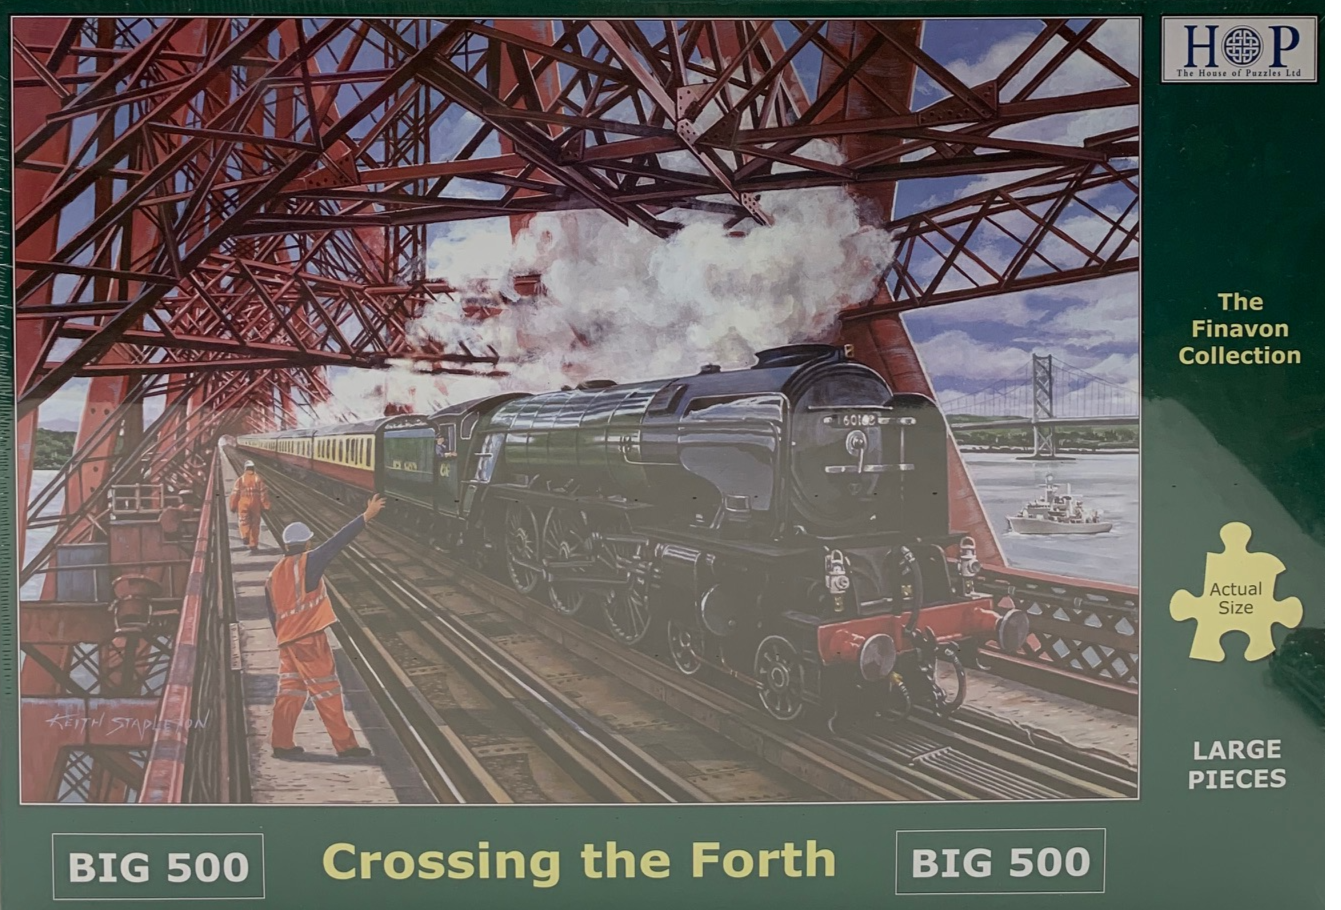 The House of Puzzles Crossing the Forth